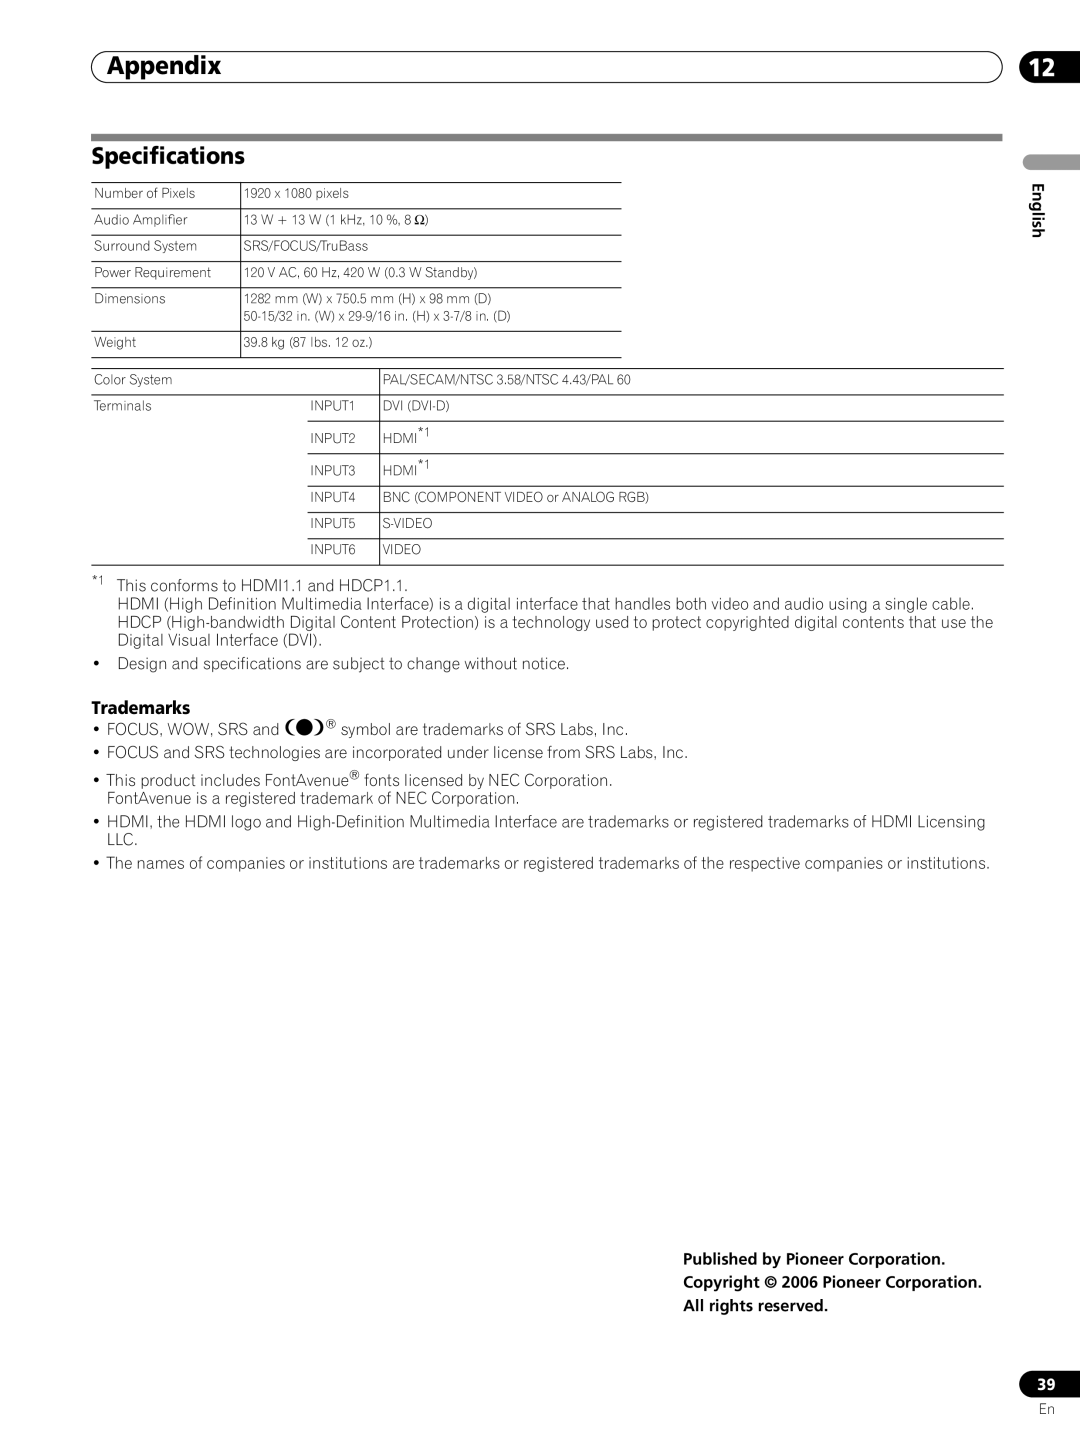 Pioneer PRO-FHD1 Appendix, Specifications, Trademarks, Published by Pioneer Corporation Copyright 2006 Pioneer Corporation 